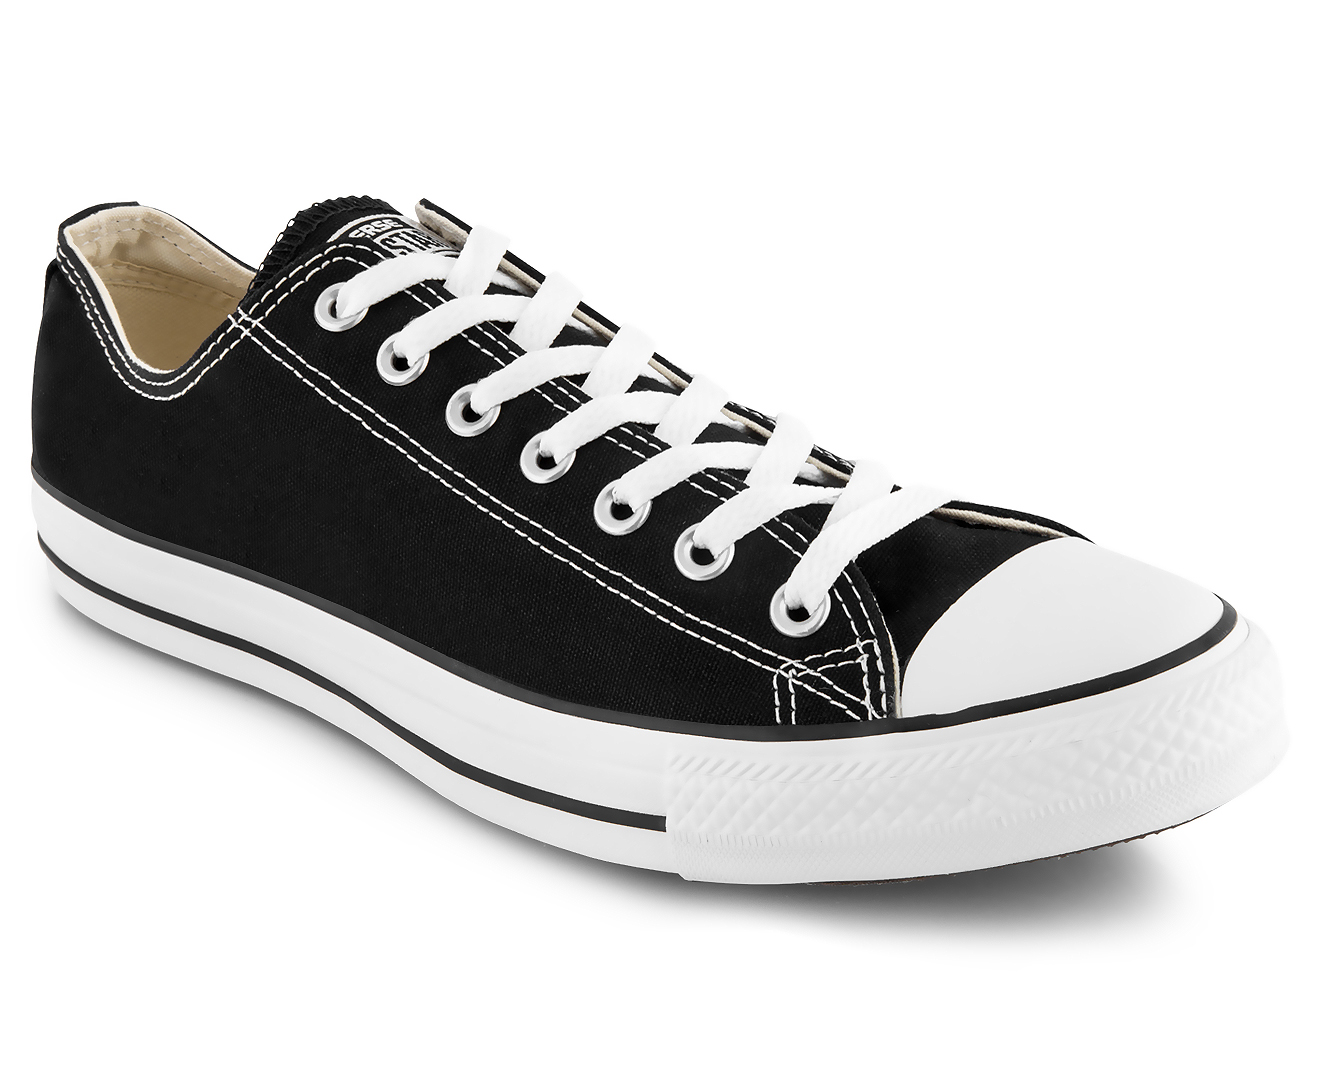 converse-unisex-chuck-taylor-all-star-low-top-sneakers-black-catch